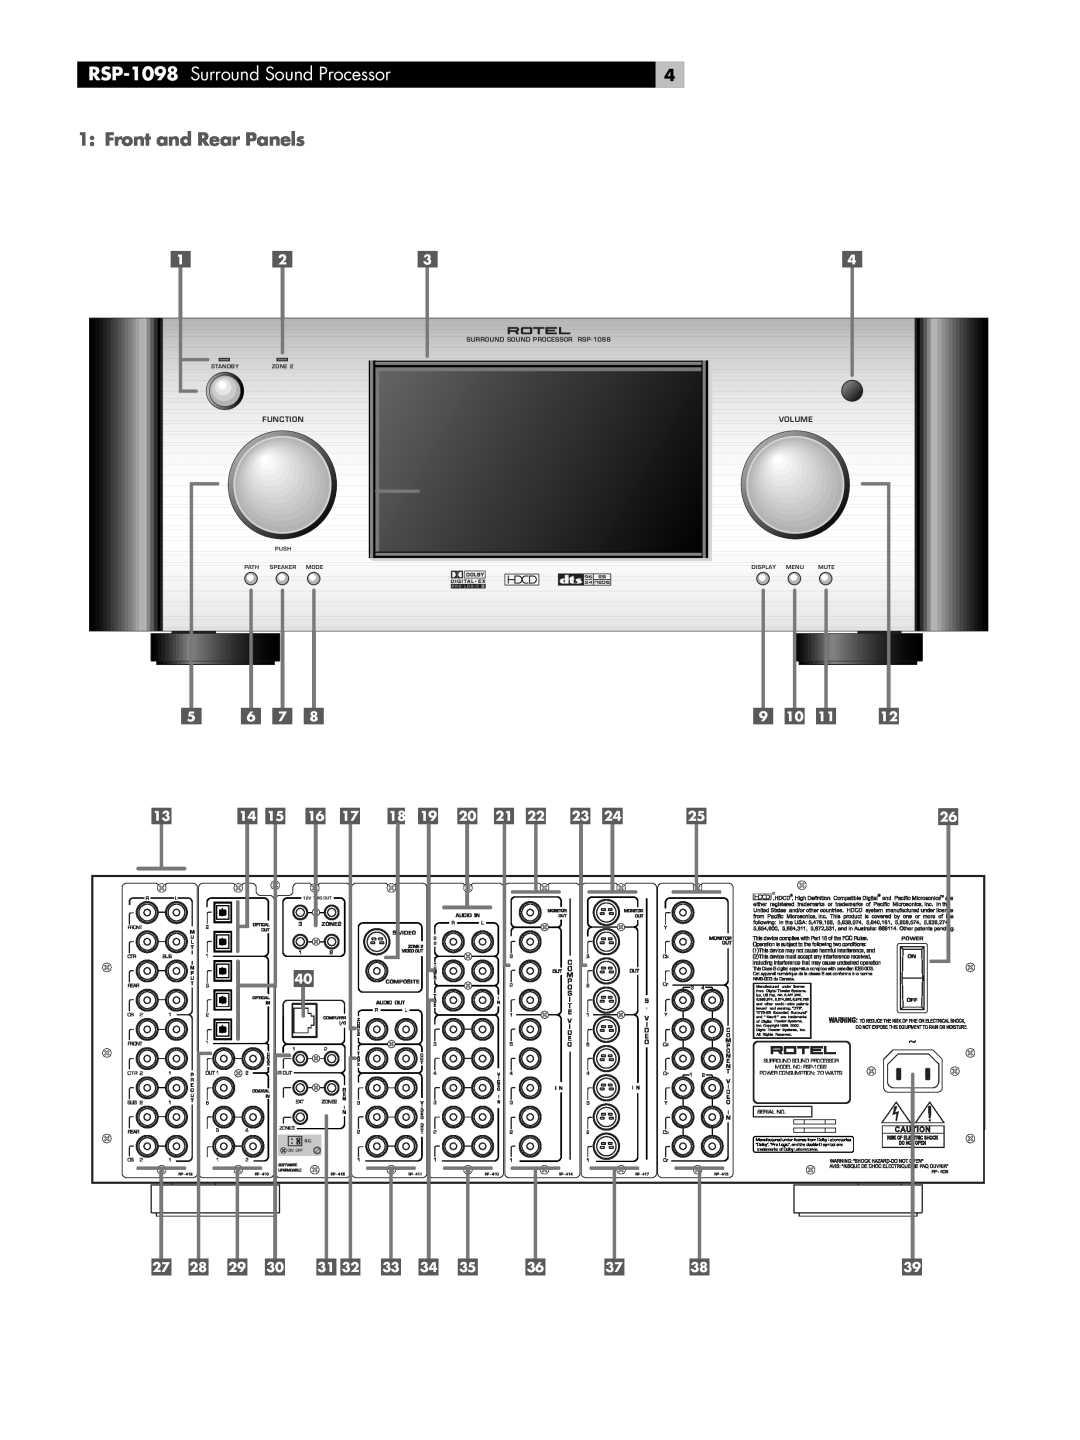 Rotel owner manual RSP-1098 Surround Sound Processor, Front and Rear Panels 